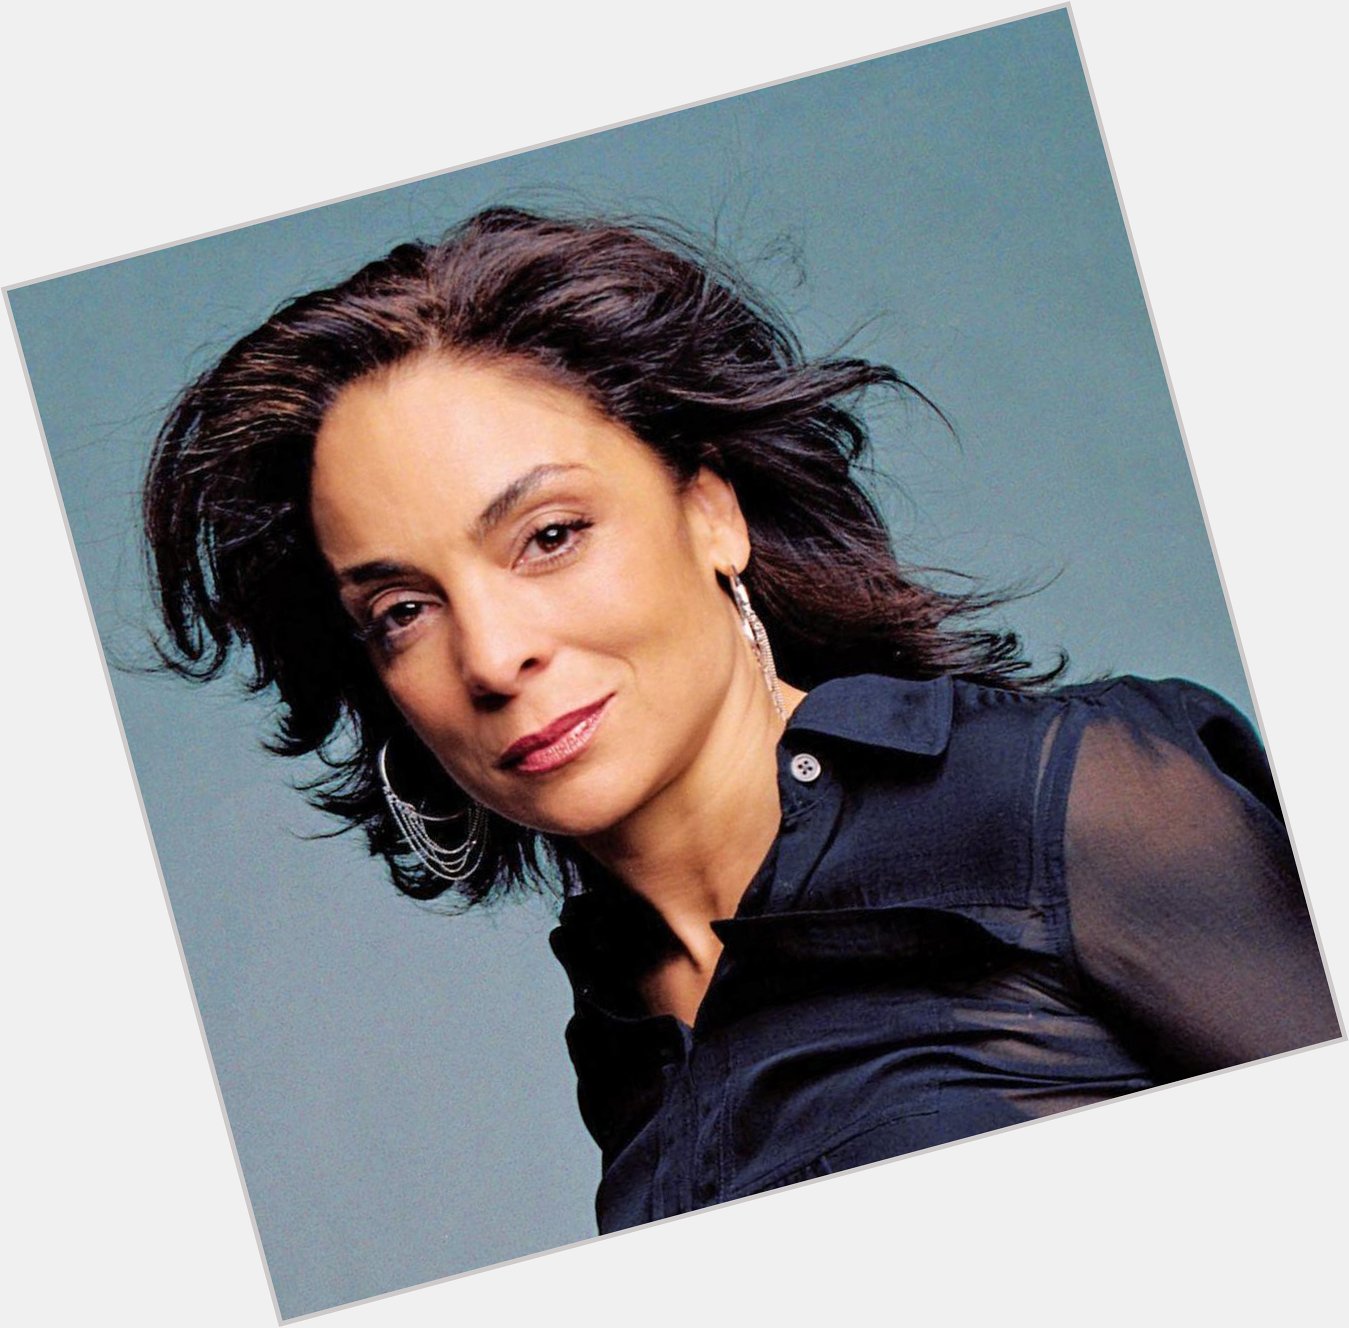 Surprise
Happy Birthday
Jasmine Guy
I very nice and I should be a part good beautiful                 